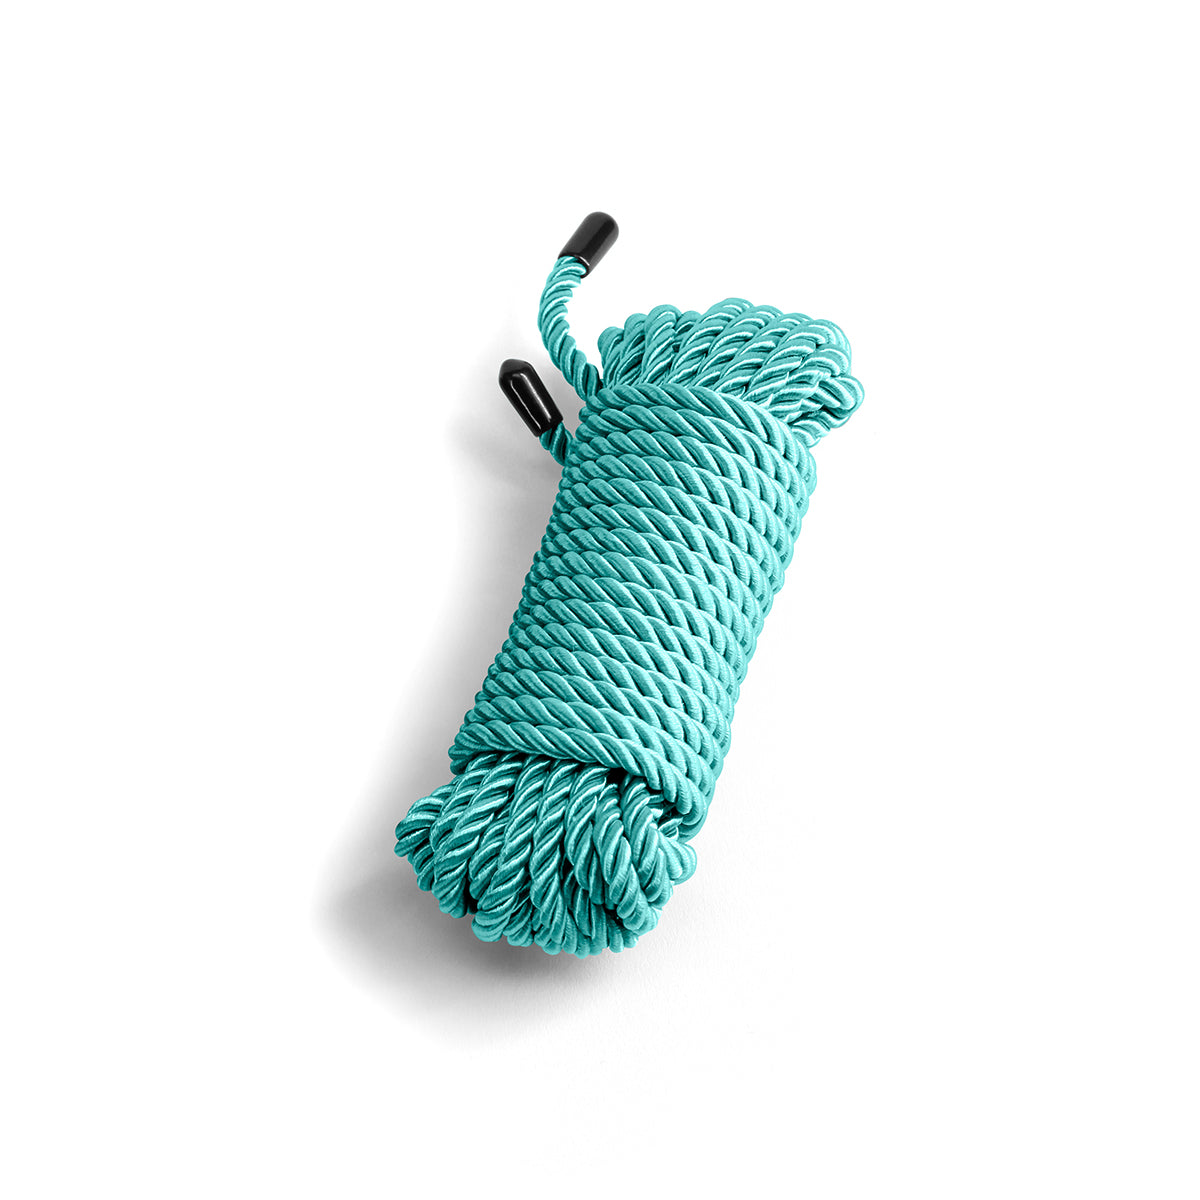 Bound Rope 25ft - Green